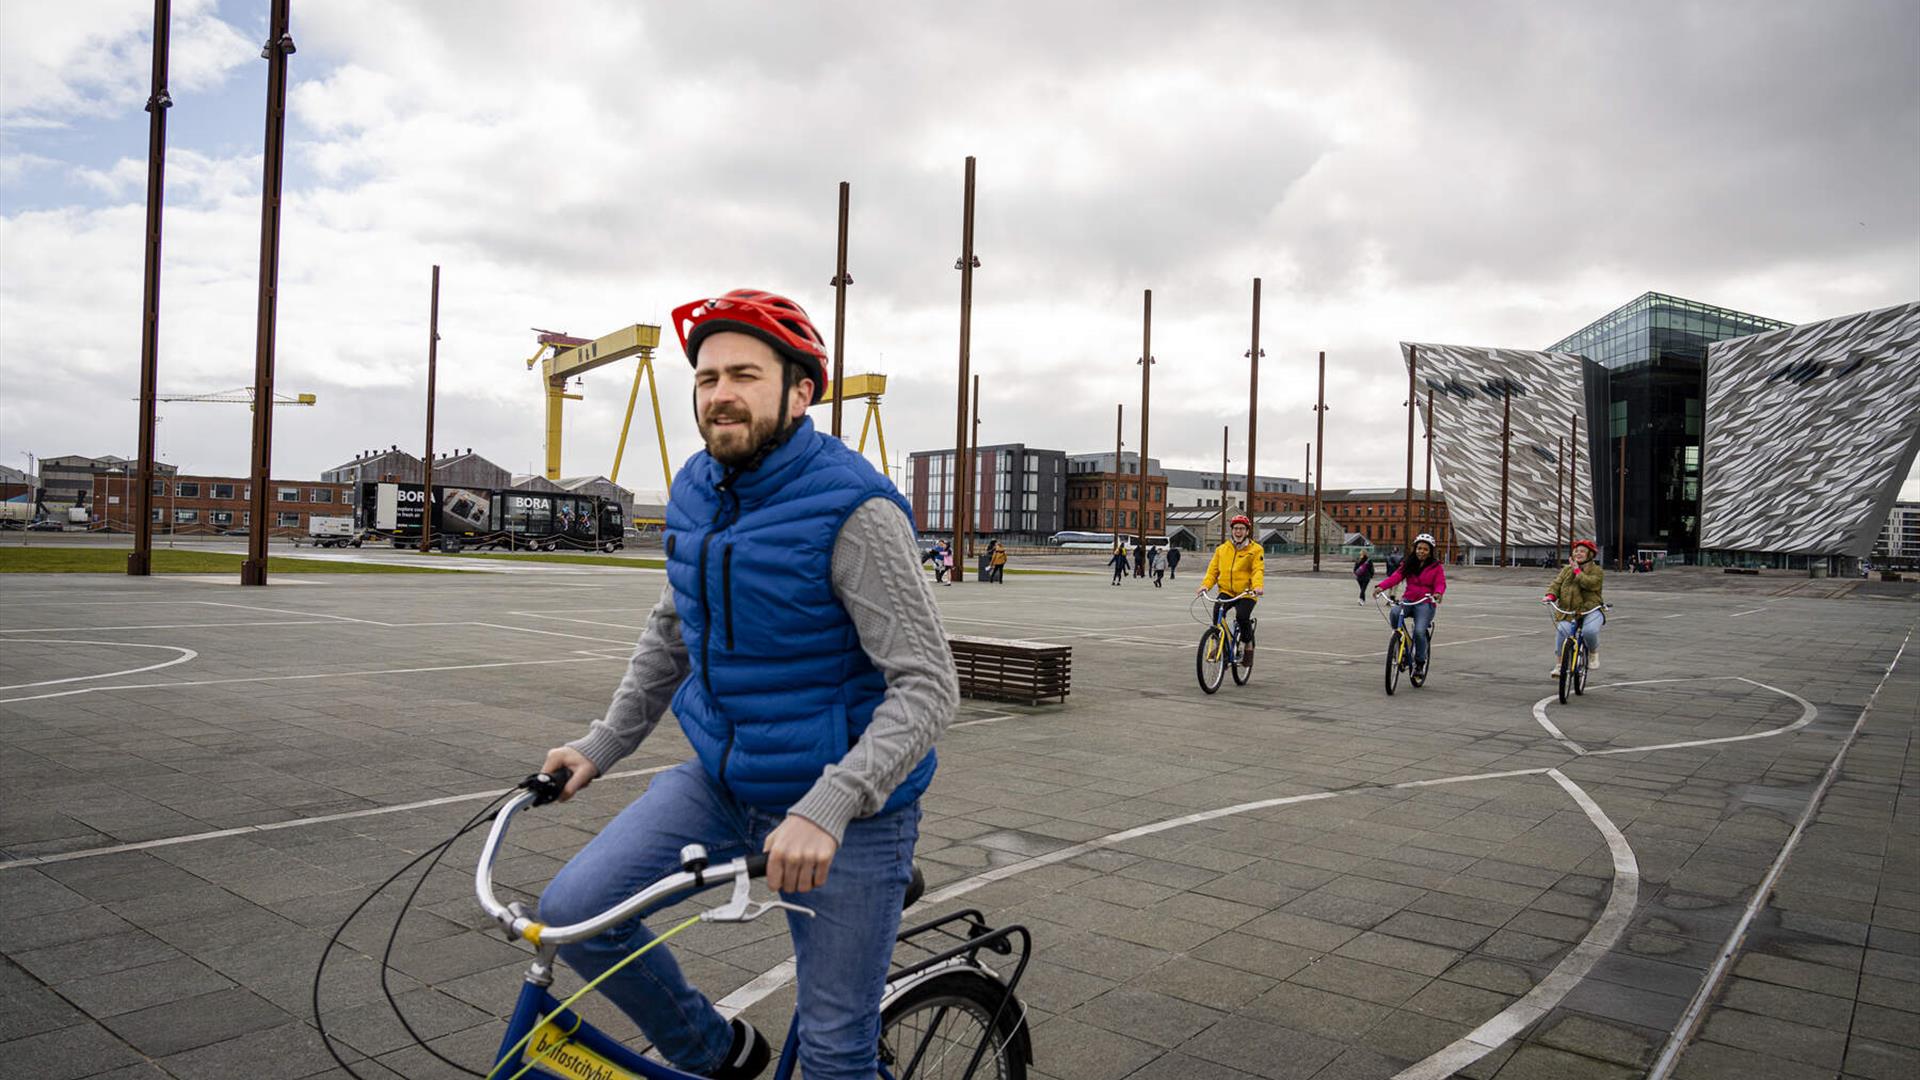 Belfast City Bike Tours takes in key sights of the city including Titanic Belfast